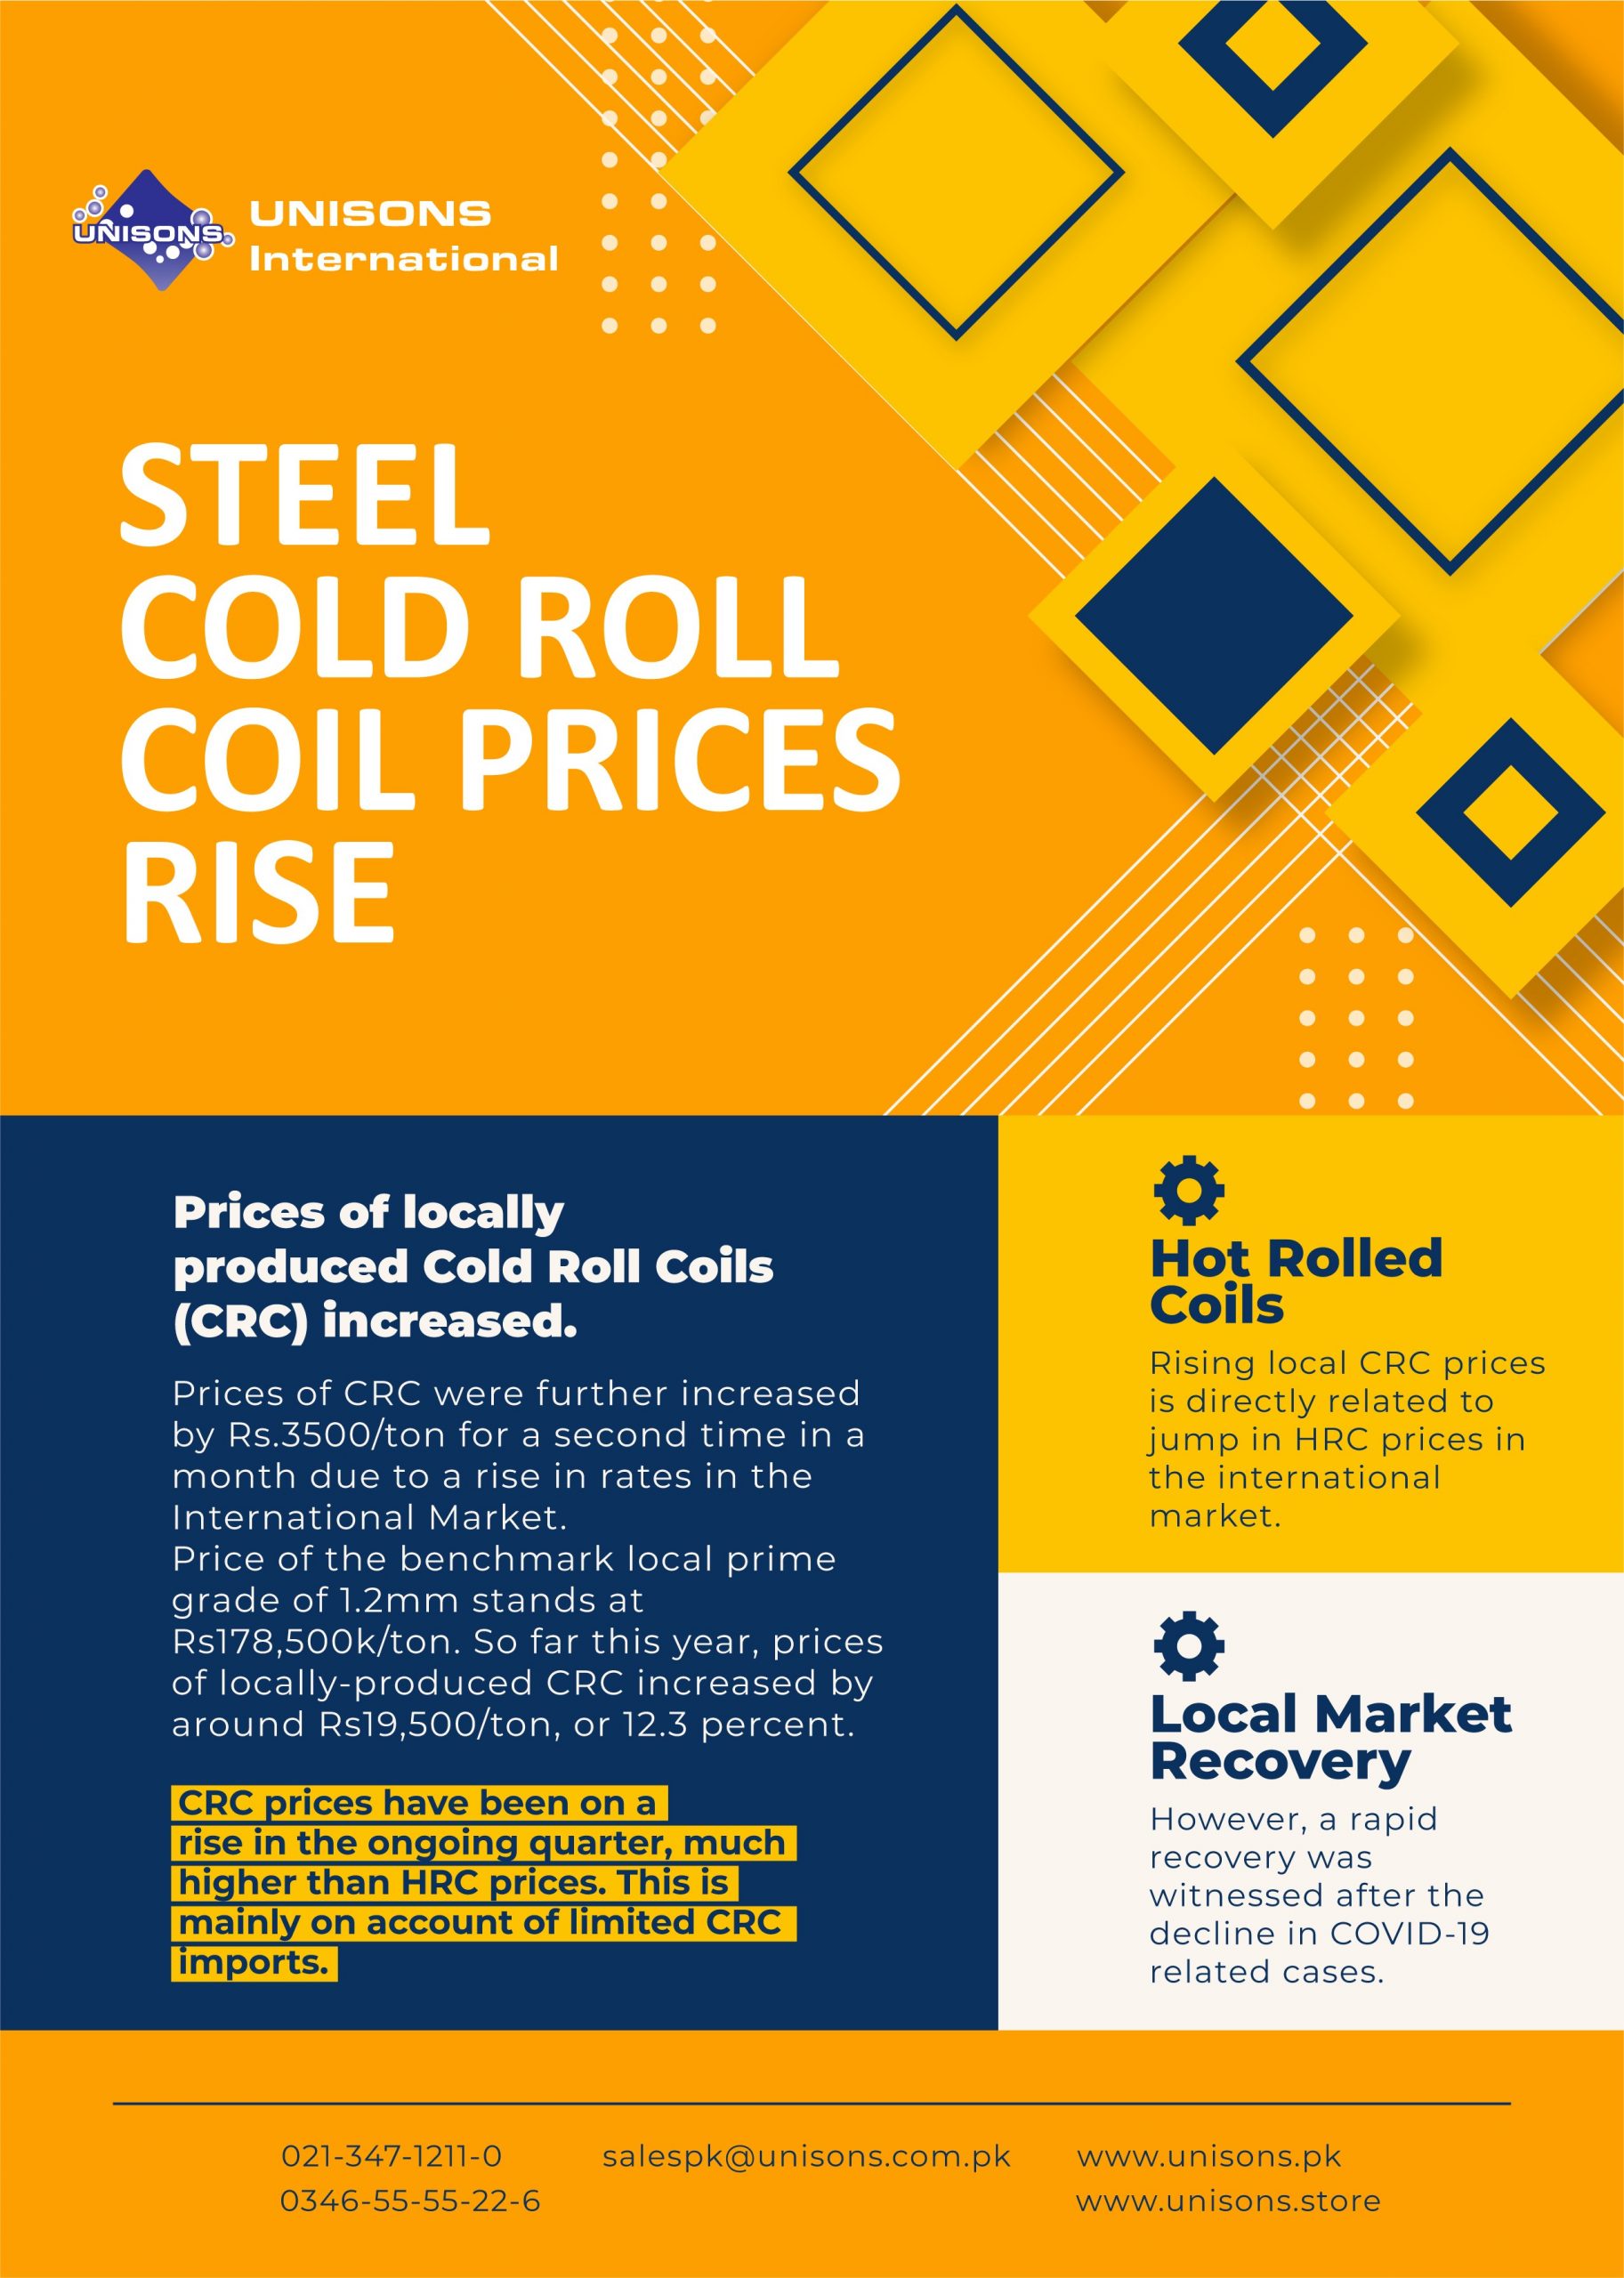 Steel Cold Roll Coil Prices Rise